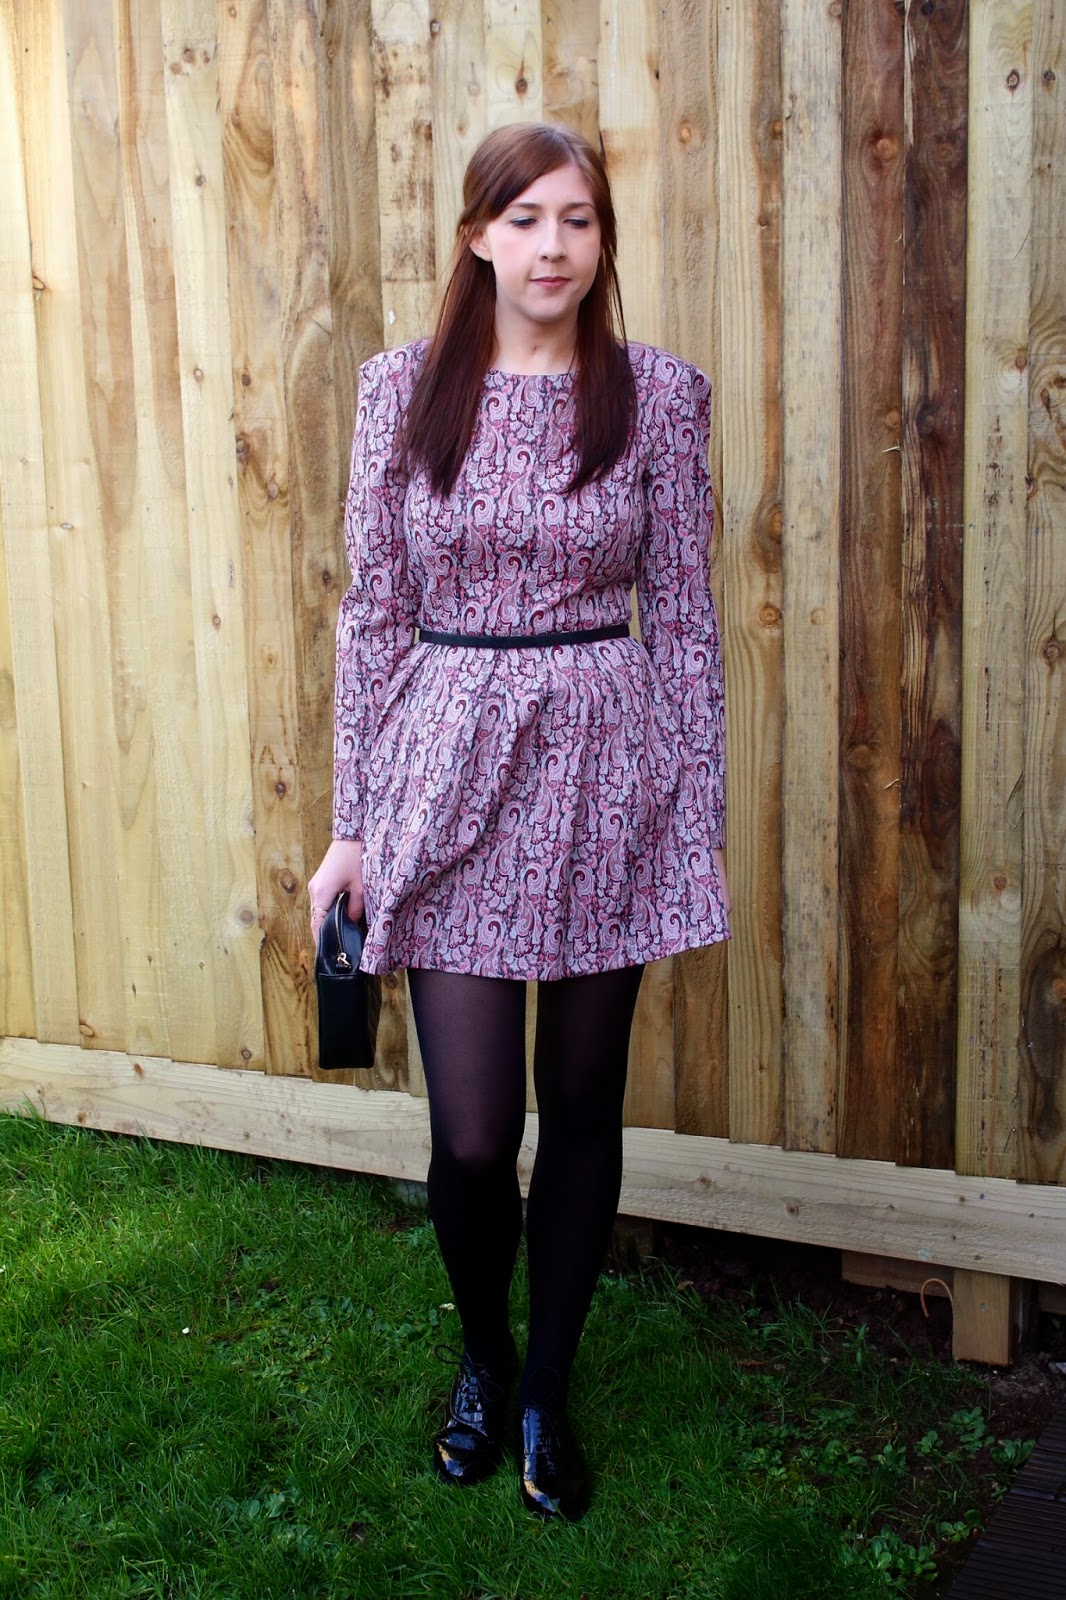 asseenonme, asos, primark, paisley, fbloggers, fashion, fashionbloggers, wiw, whatimwearing, ootd, outfitoftheday, lotd, lookoftheday, primarkdress, paisleydress, brogues, partylook